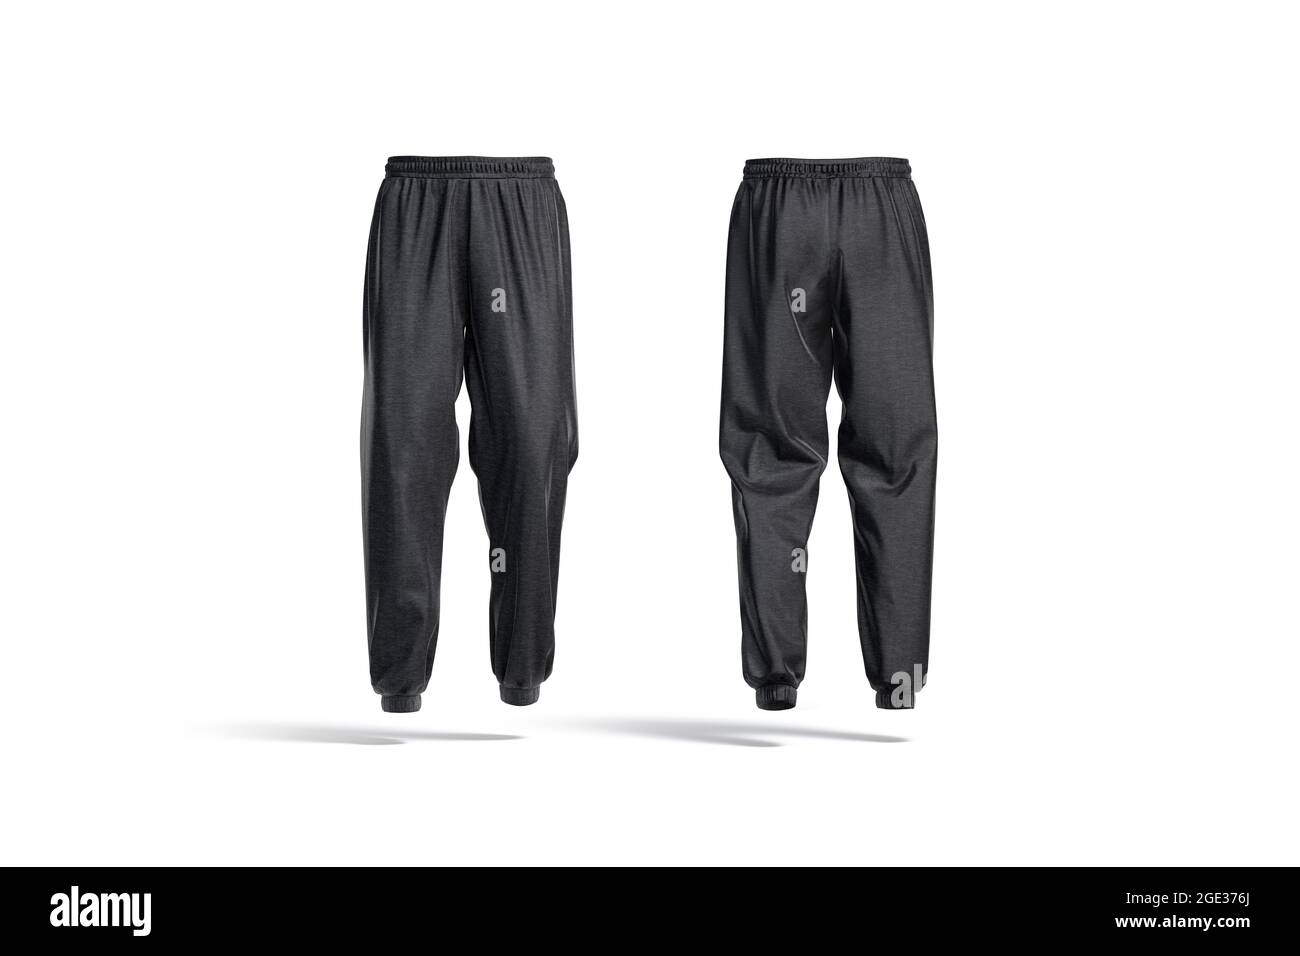 Blank black sport sweatpants mockup, front and back view, 3d